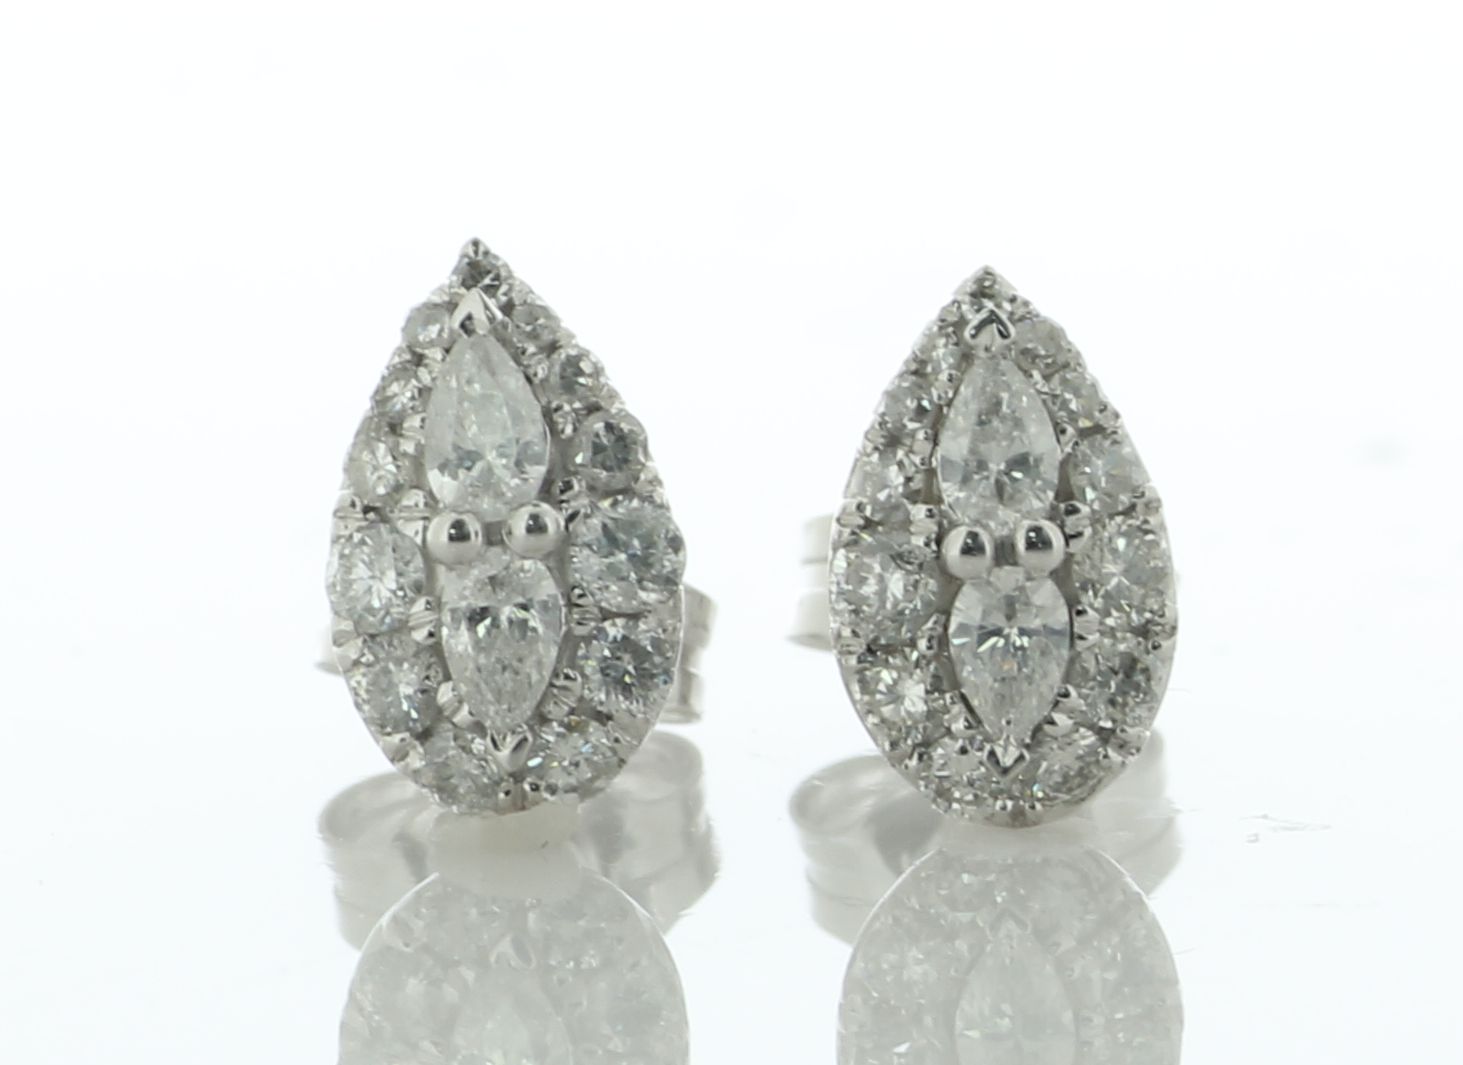 9ct White Gold Pear Shaped Cluster Diamond Stud Earring 0.40 Carats - Image 4 of 5